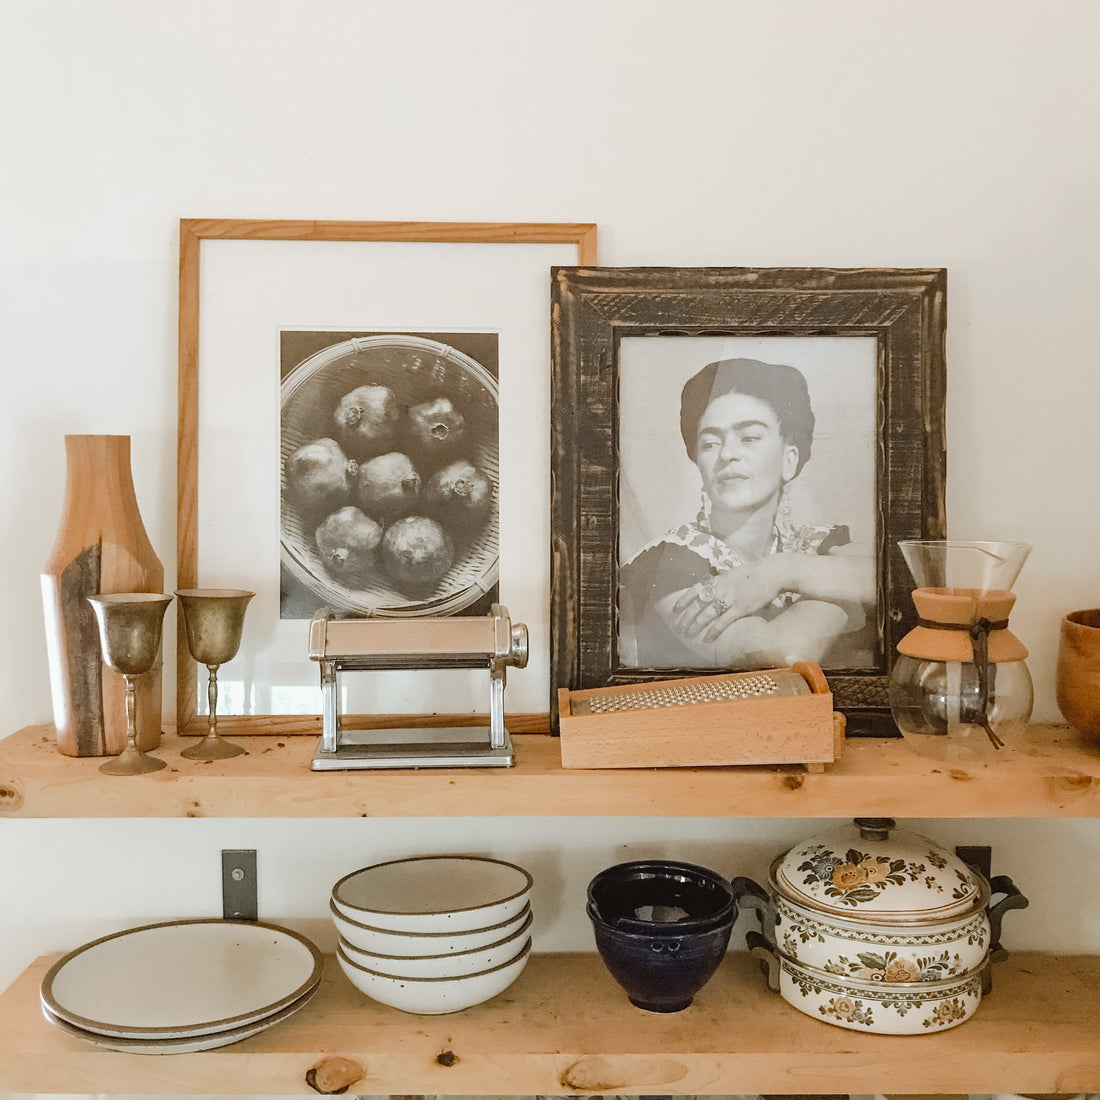 Kitchen shelves containing framed black and white photos of pomegranates and Frida Kahlo, a pasta machine, boxed cheese grater and various dishes